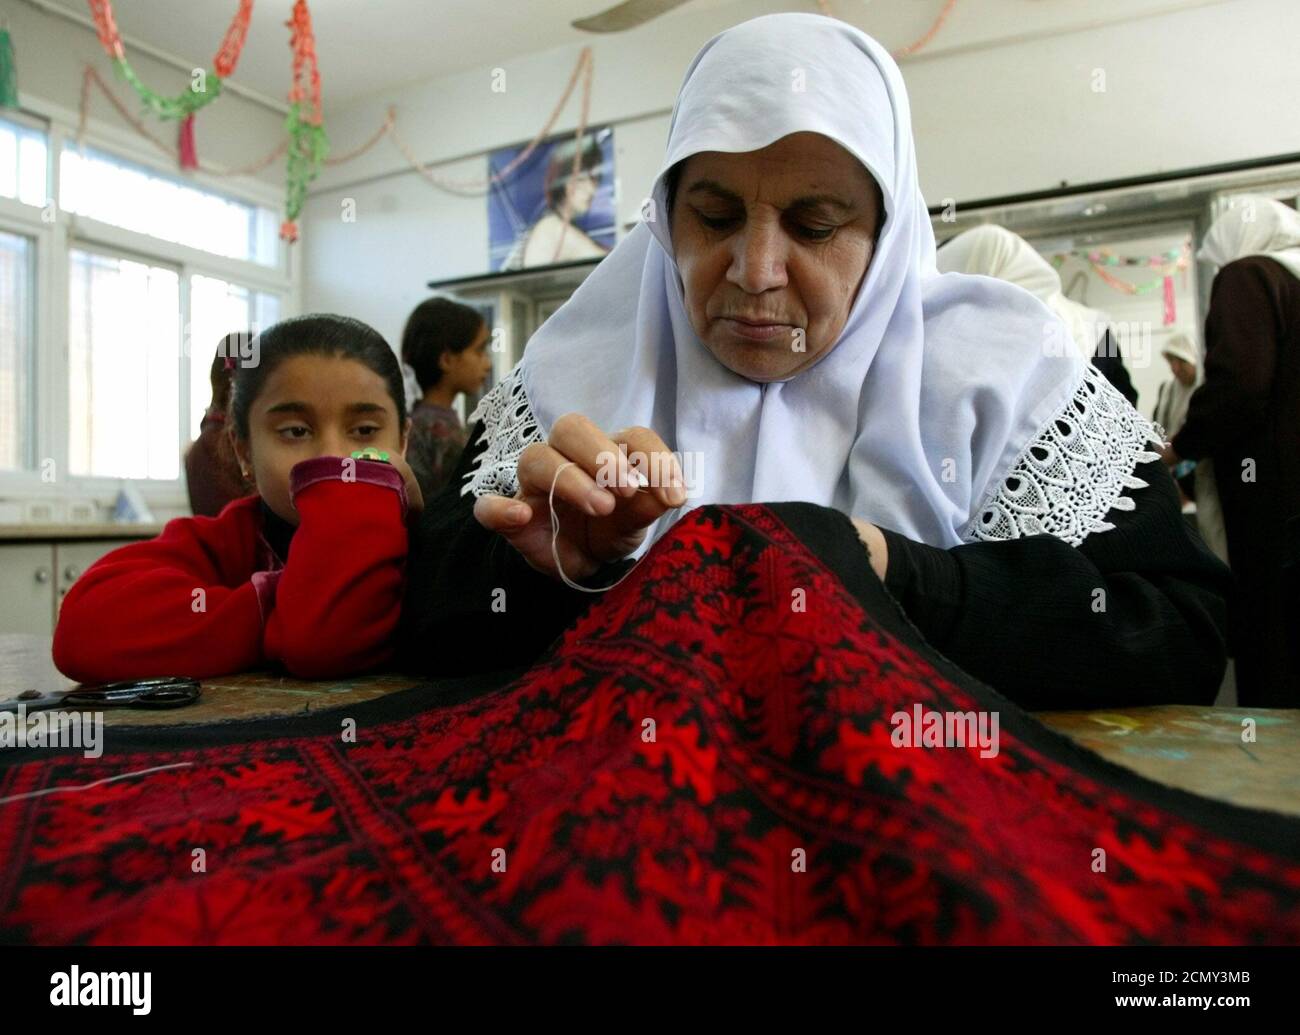 A Palestinian woman is watched by a young girl as she embroiders in a women programme center in Gaza City January 5, 2003, where women are taught hairdressing, stitching and embroidery and IT skills. Palestinian women have been exposed to increased domestic violence since the beginning of the intifada, or Palestinian uprising, 29 months ago, according to the Palestinian Center for Public Opinion (PCPO), which was commissioned by a Palestinian women's organization to conduct a poll. The poll showed that 86 percent of respondents said violence against women had significantly or somewhat increase Stock Photo